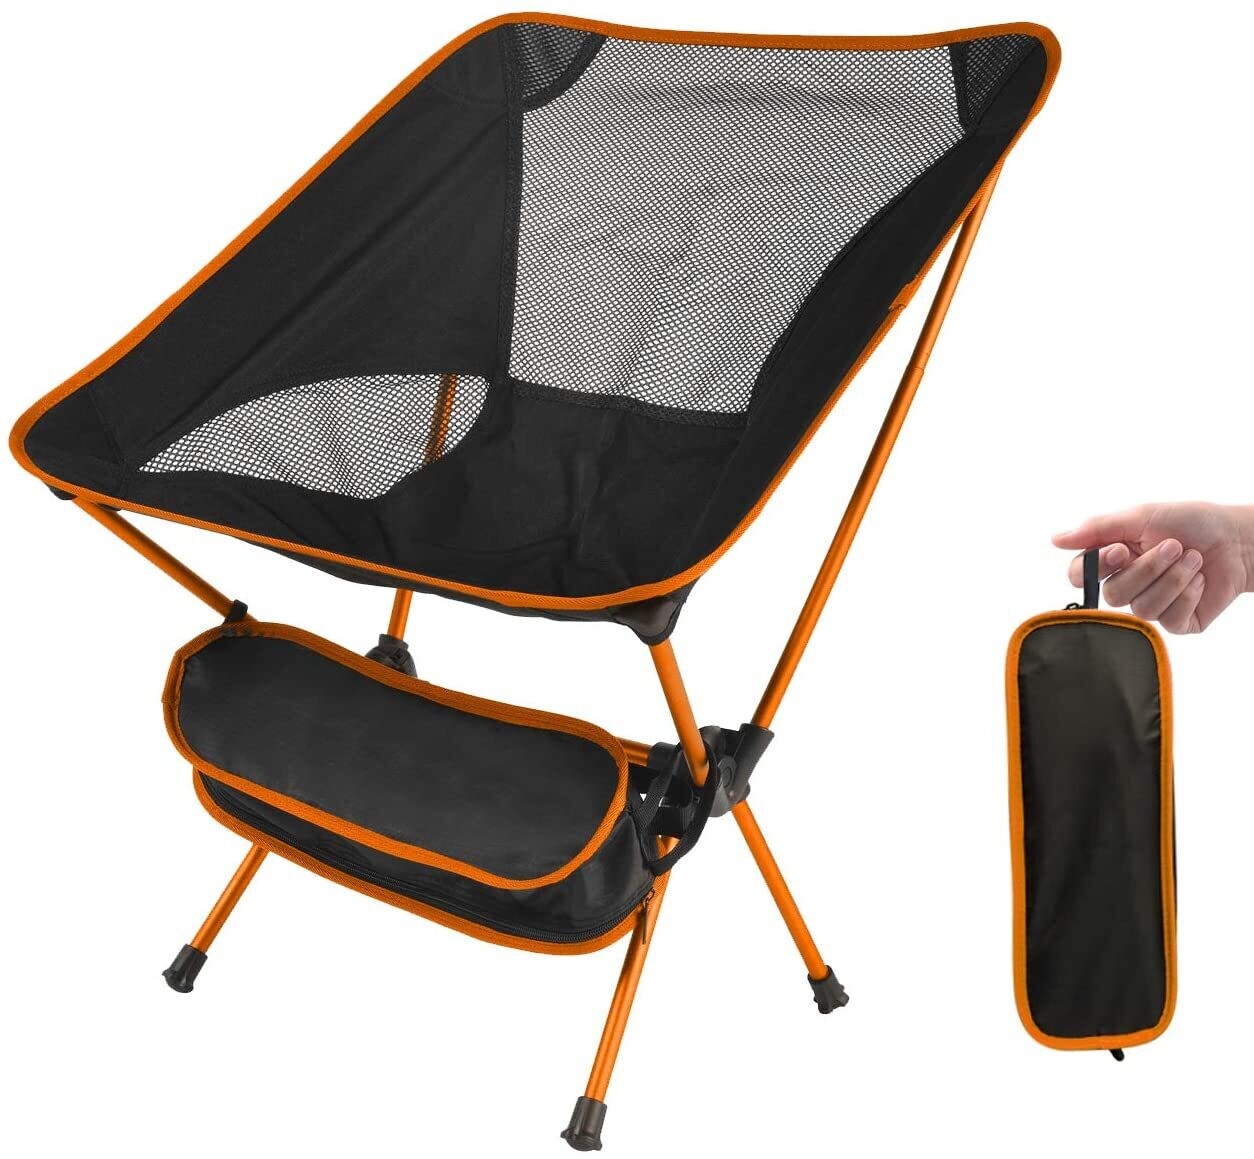 Collapsible Lightweight Portable Chairs